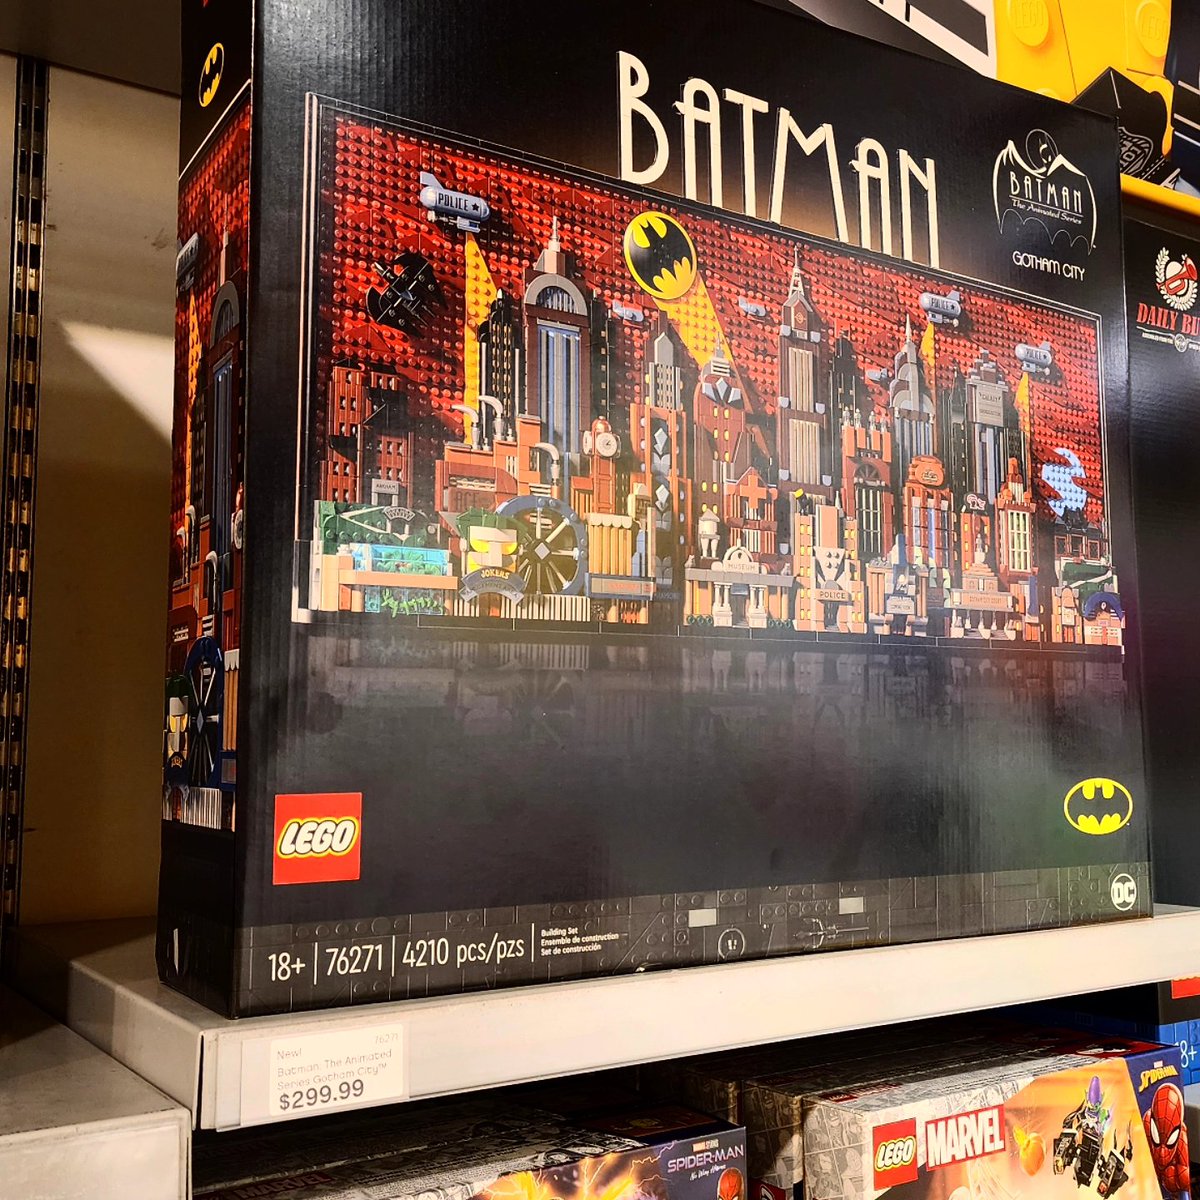 Spotted at Lego Store. Batman The Animated Series Gotham City. Swipe for more 📷. Check out the minifigures. 

#lego #catwoman #thejoker  #legophotography #legostore #legogram  #legominifigures #batmantheanimatedseries #legominifigures #harleyquinn #dcuniverse #dc  #toys